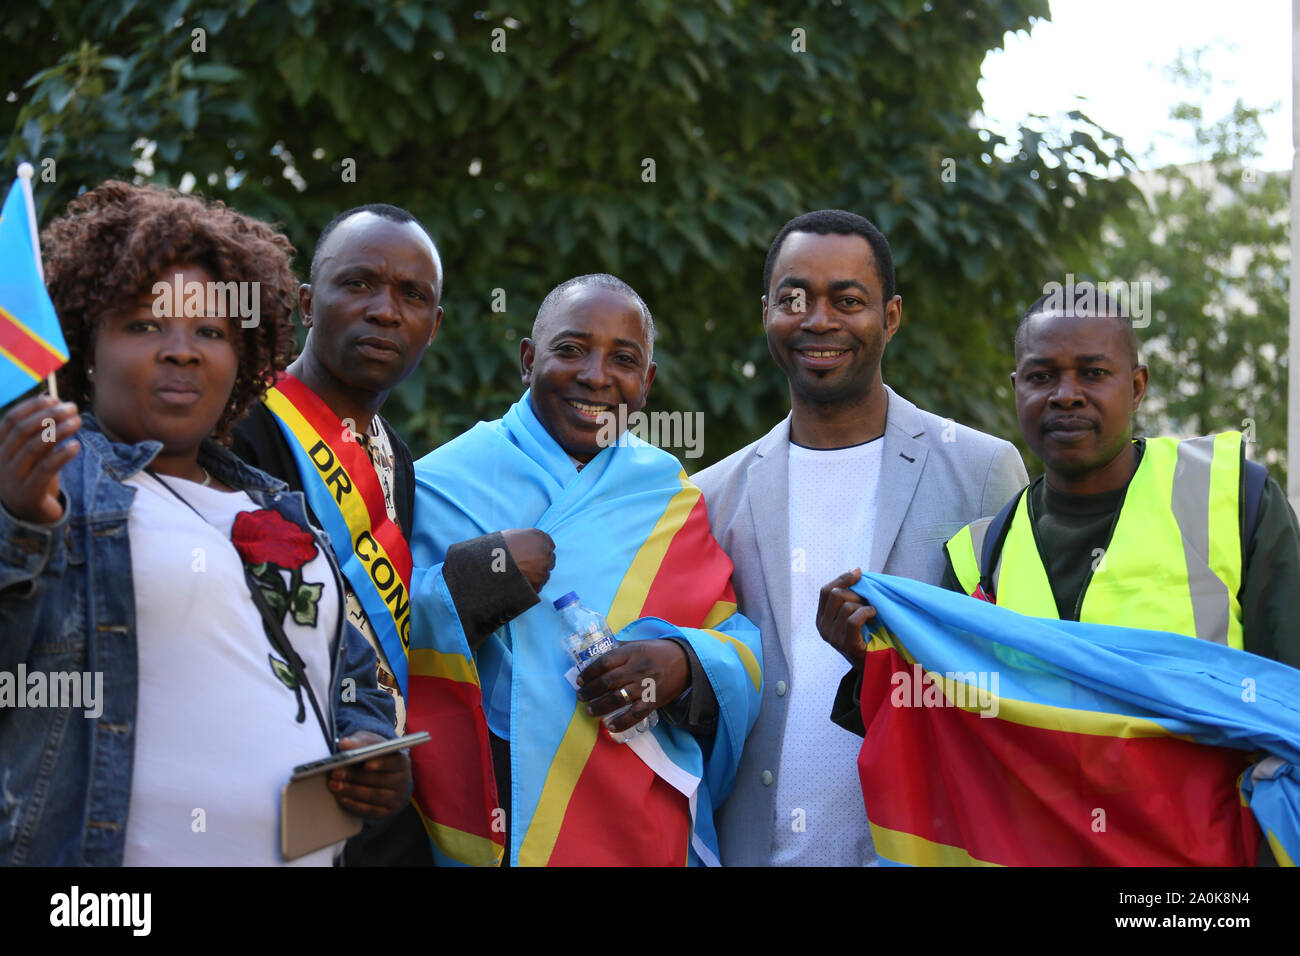 Manchester, UK. 20th September,2019. Members of the Congolese community  from the democratic Republic of Congo and friends of the Congo hold a  solidarity rally with the Congolese population of the Eastern part